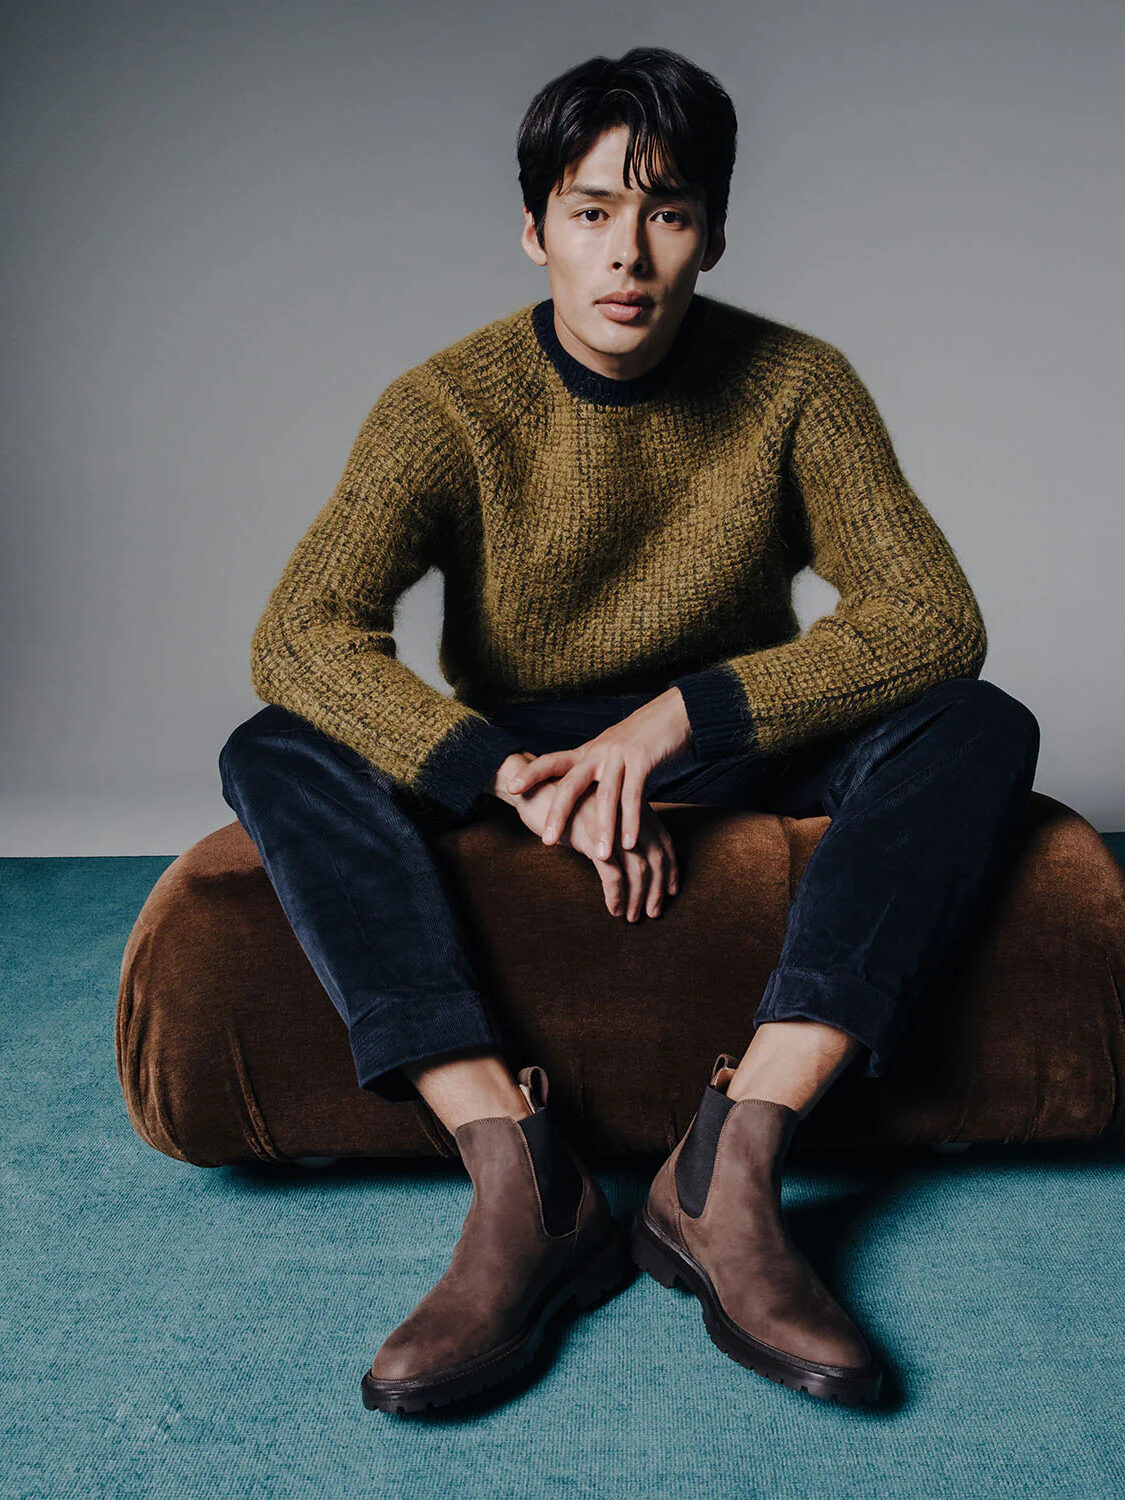 A model seated on a brown cushion wearing Koio brown boots.